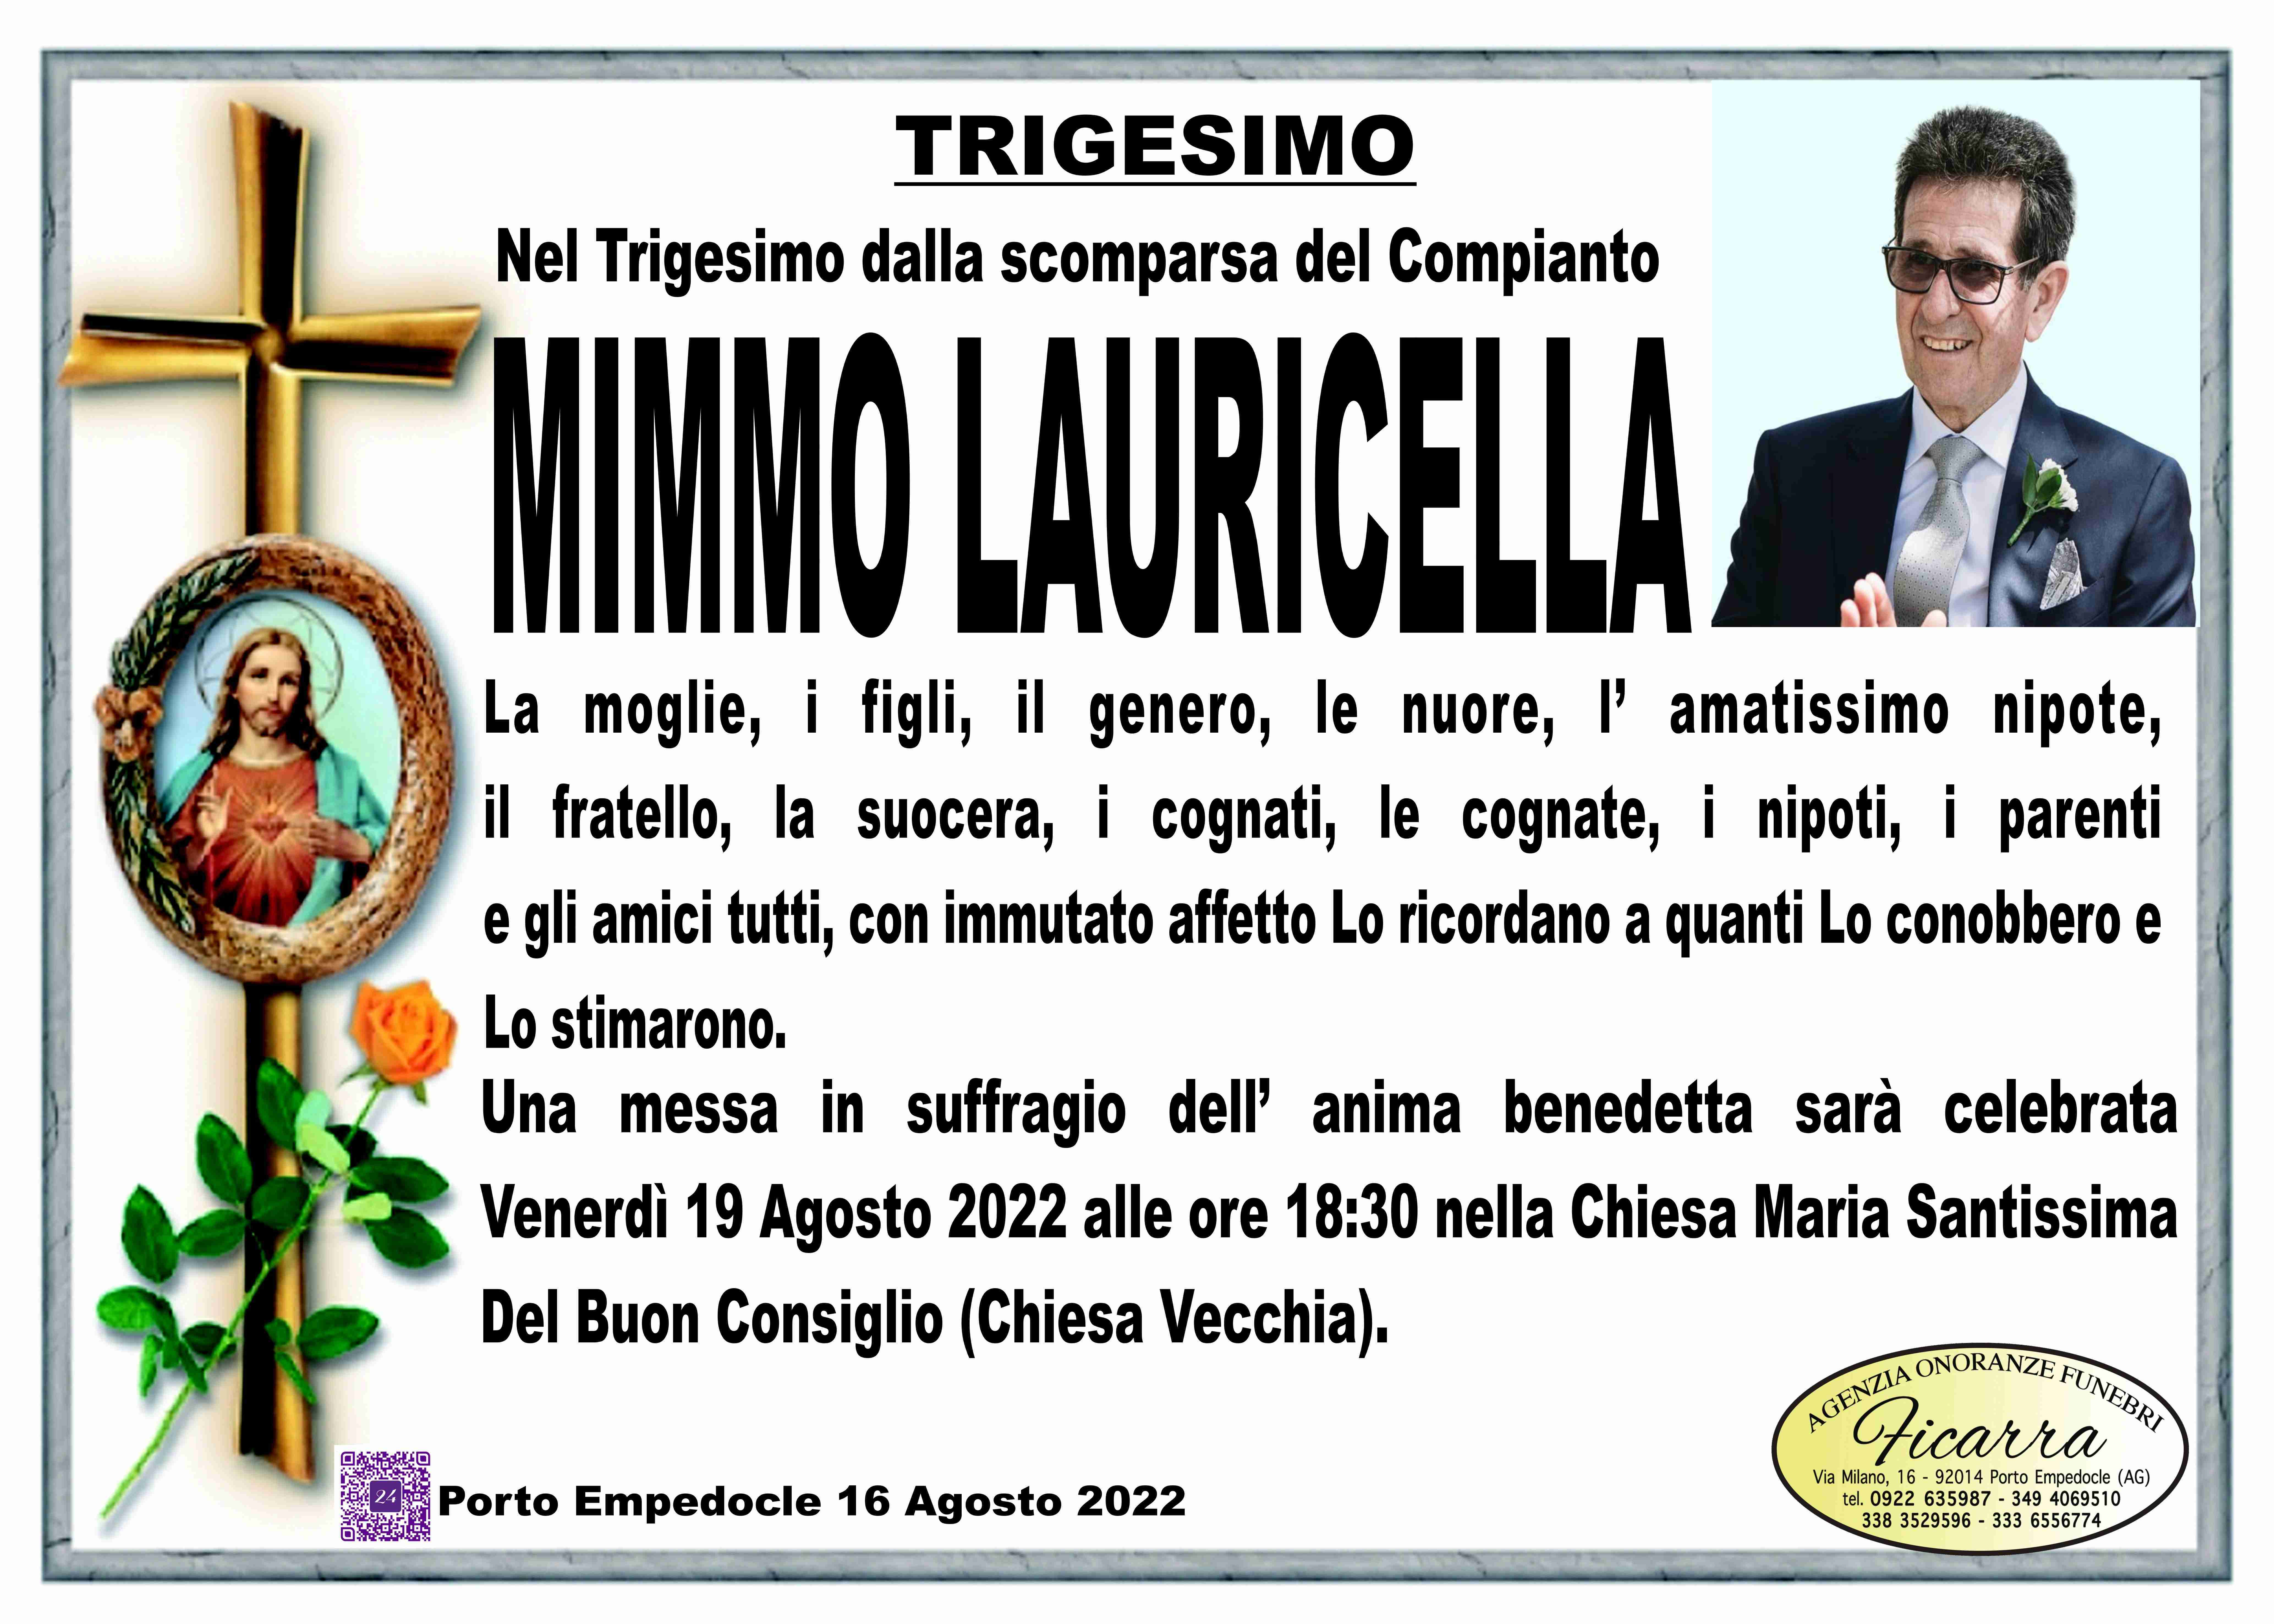 Mimmo Lauricella